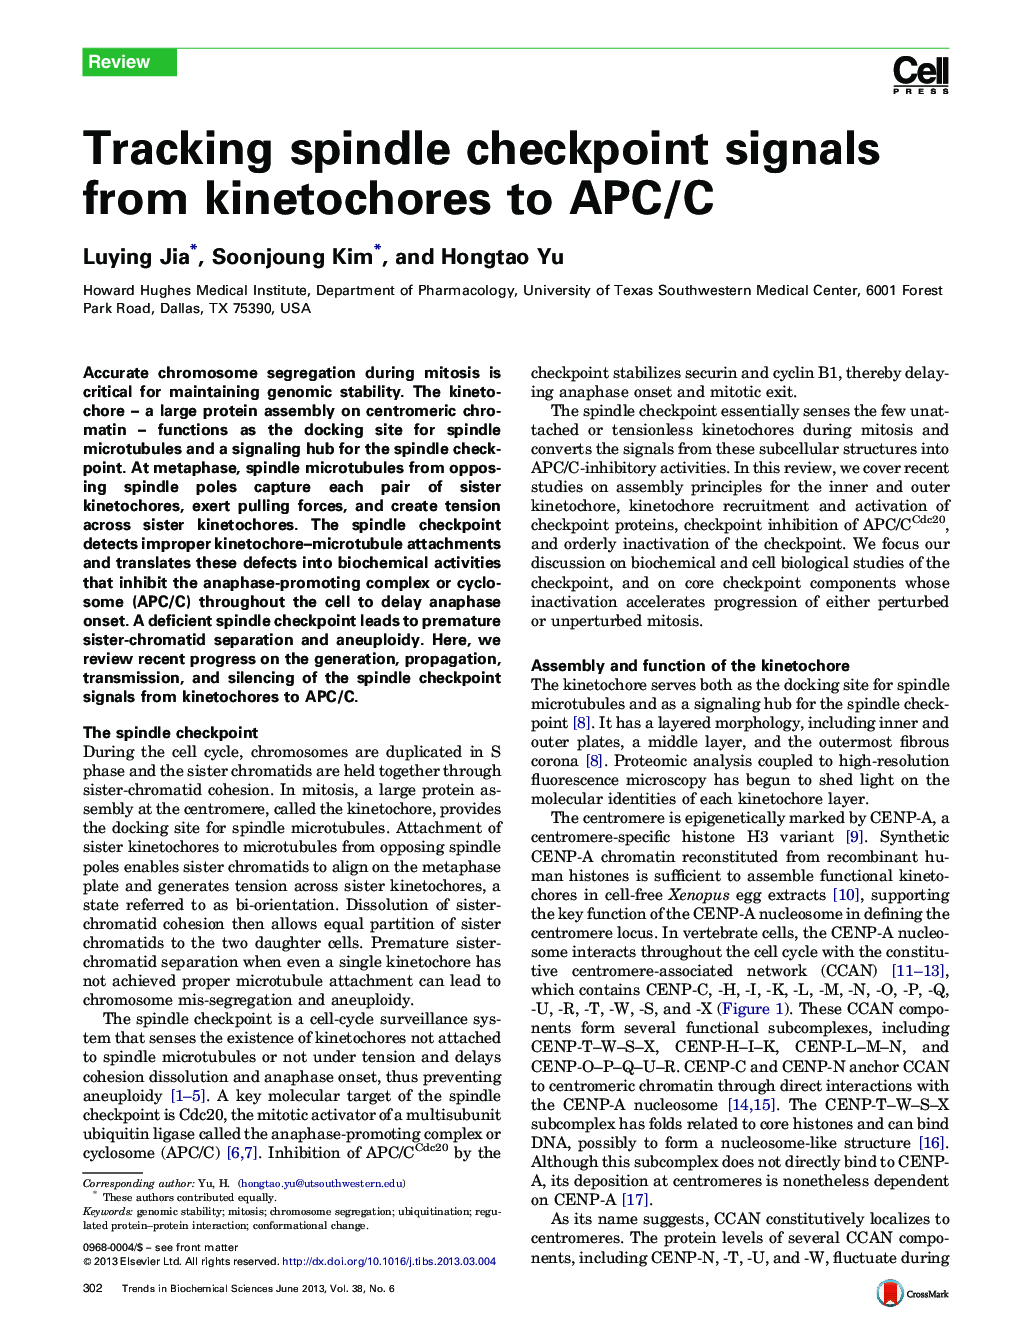 Tracking spindle checkpoint signals from kinetochores to APC/C